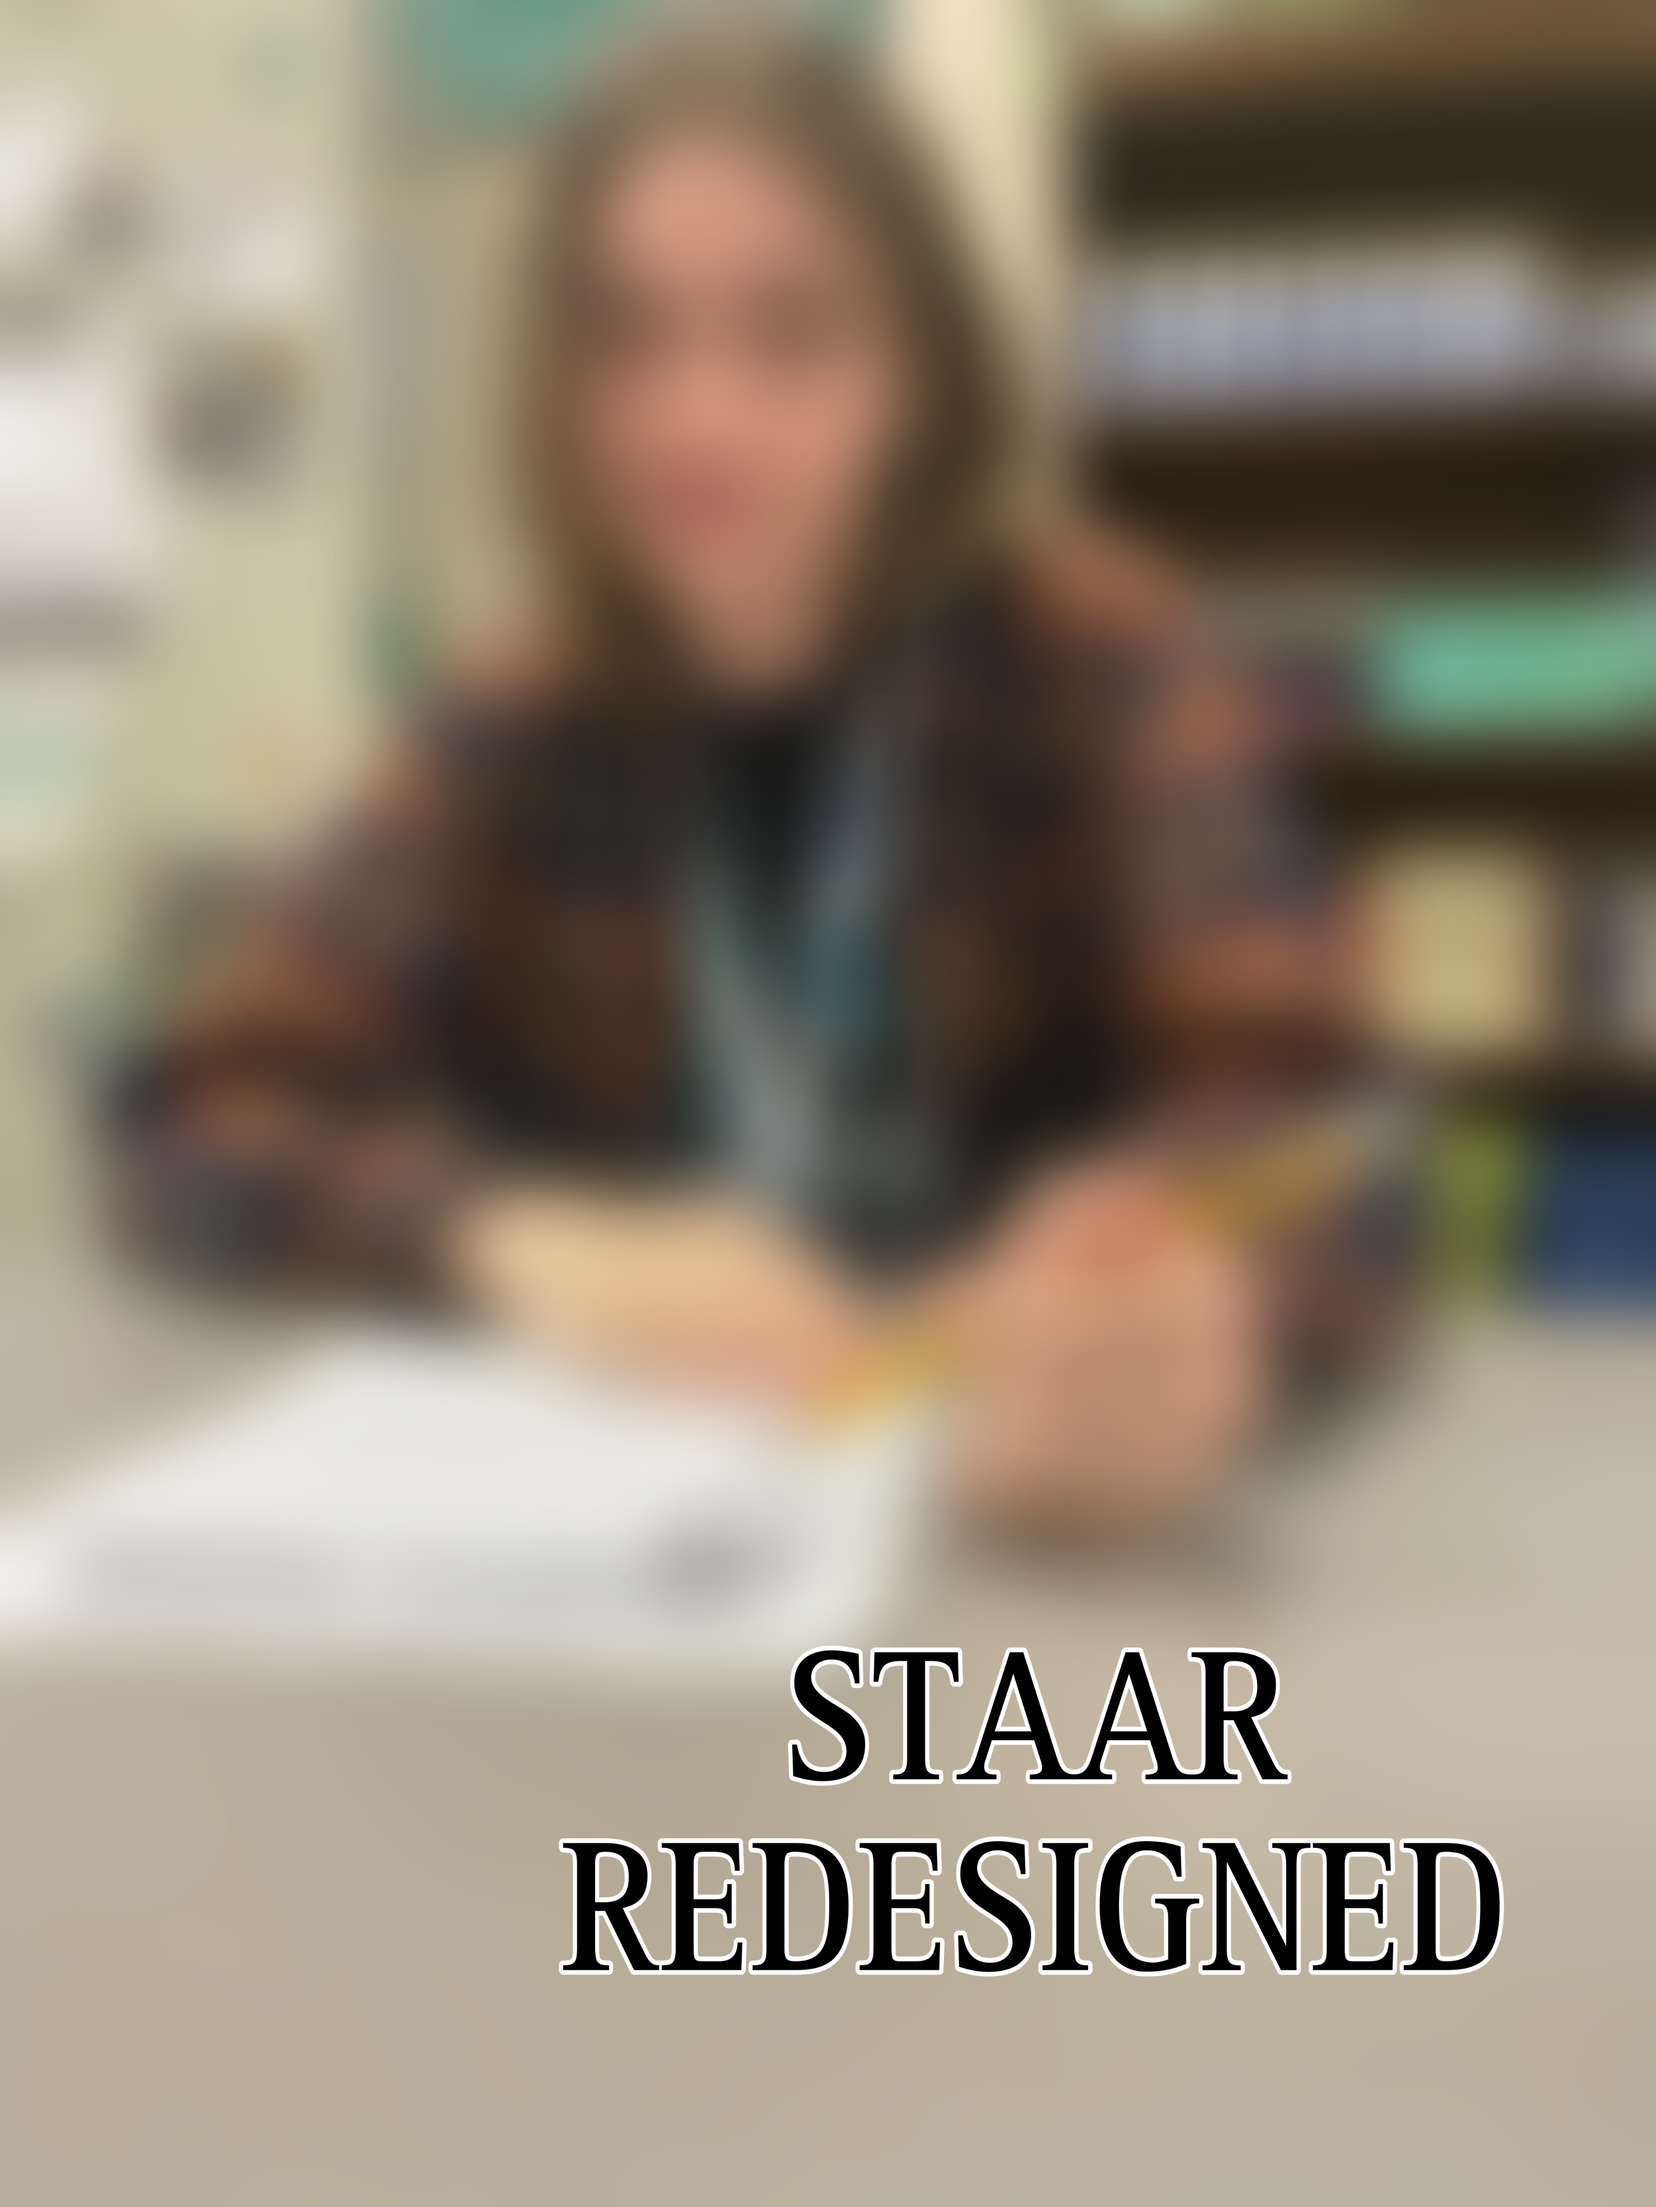 Preston Hennessy is seen taking the redesigned STAAR test for 2022-2023.